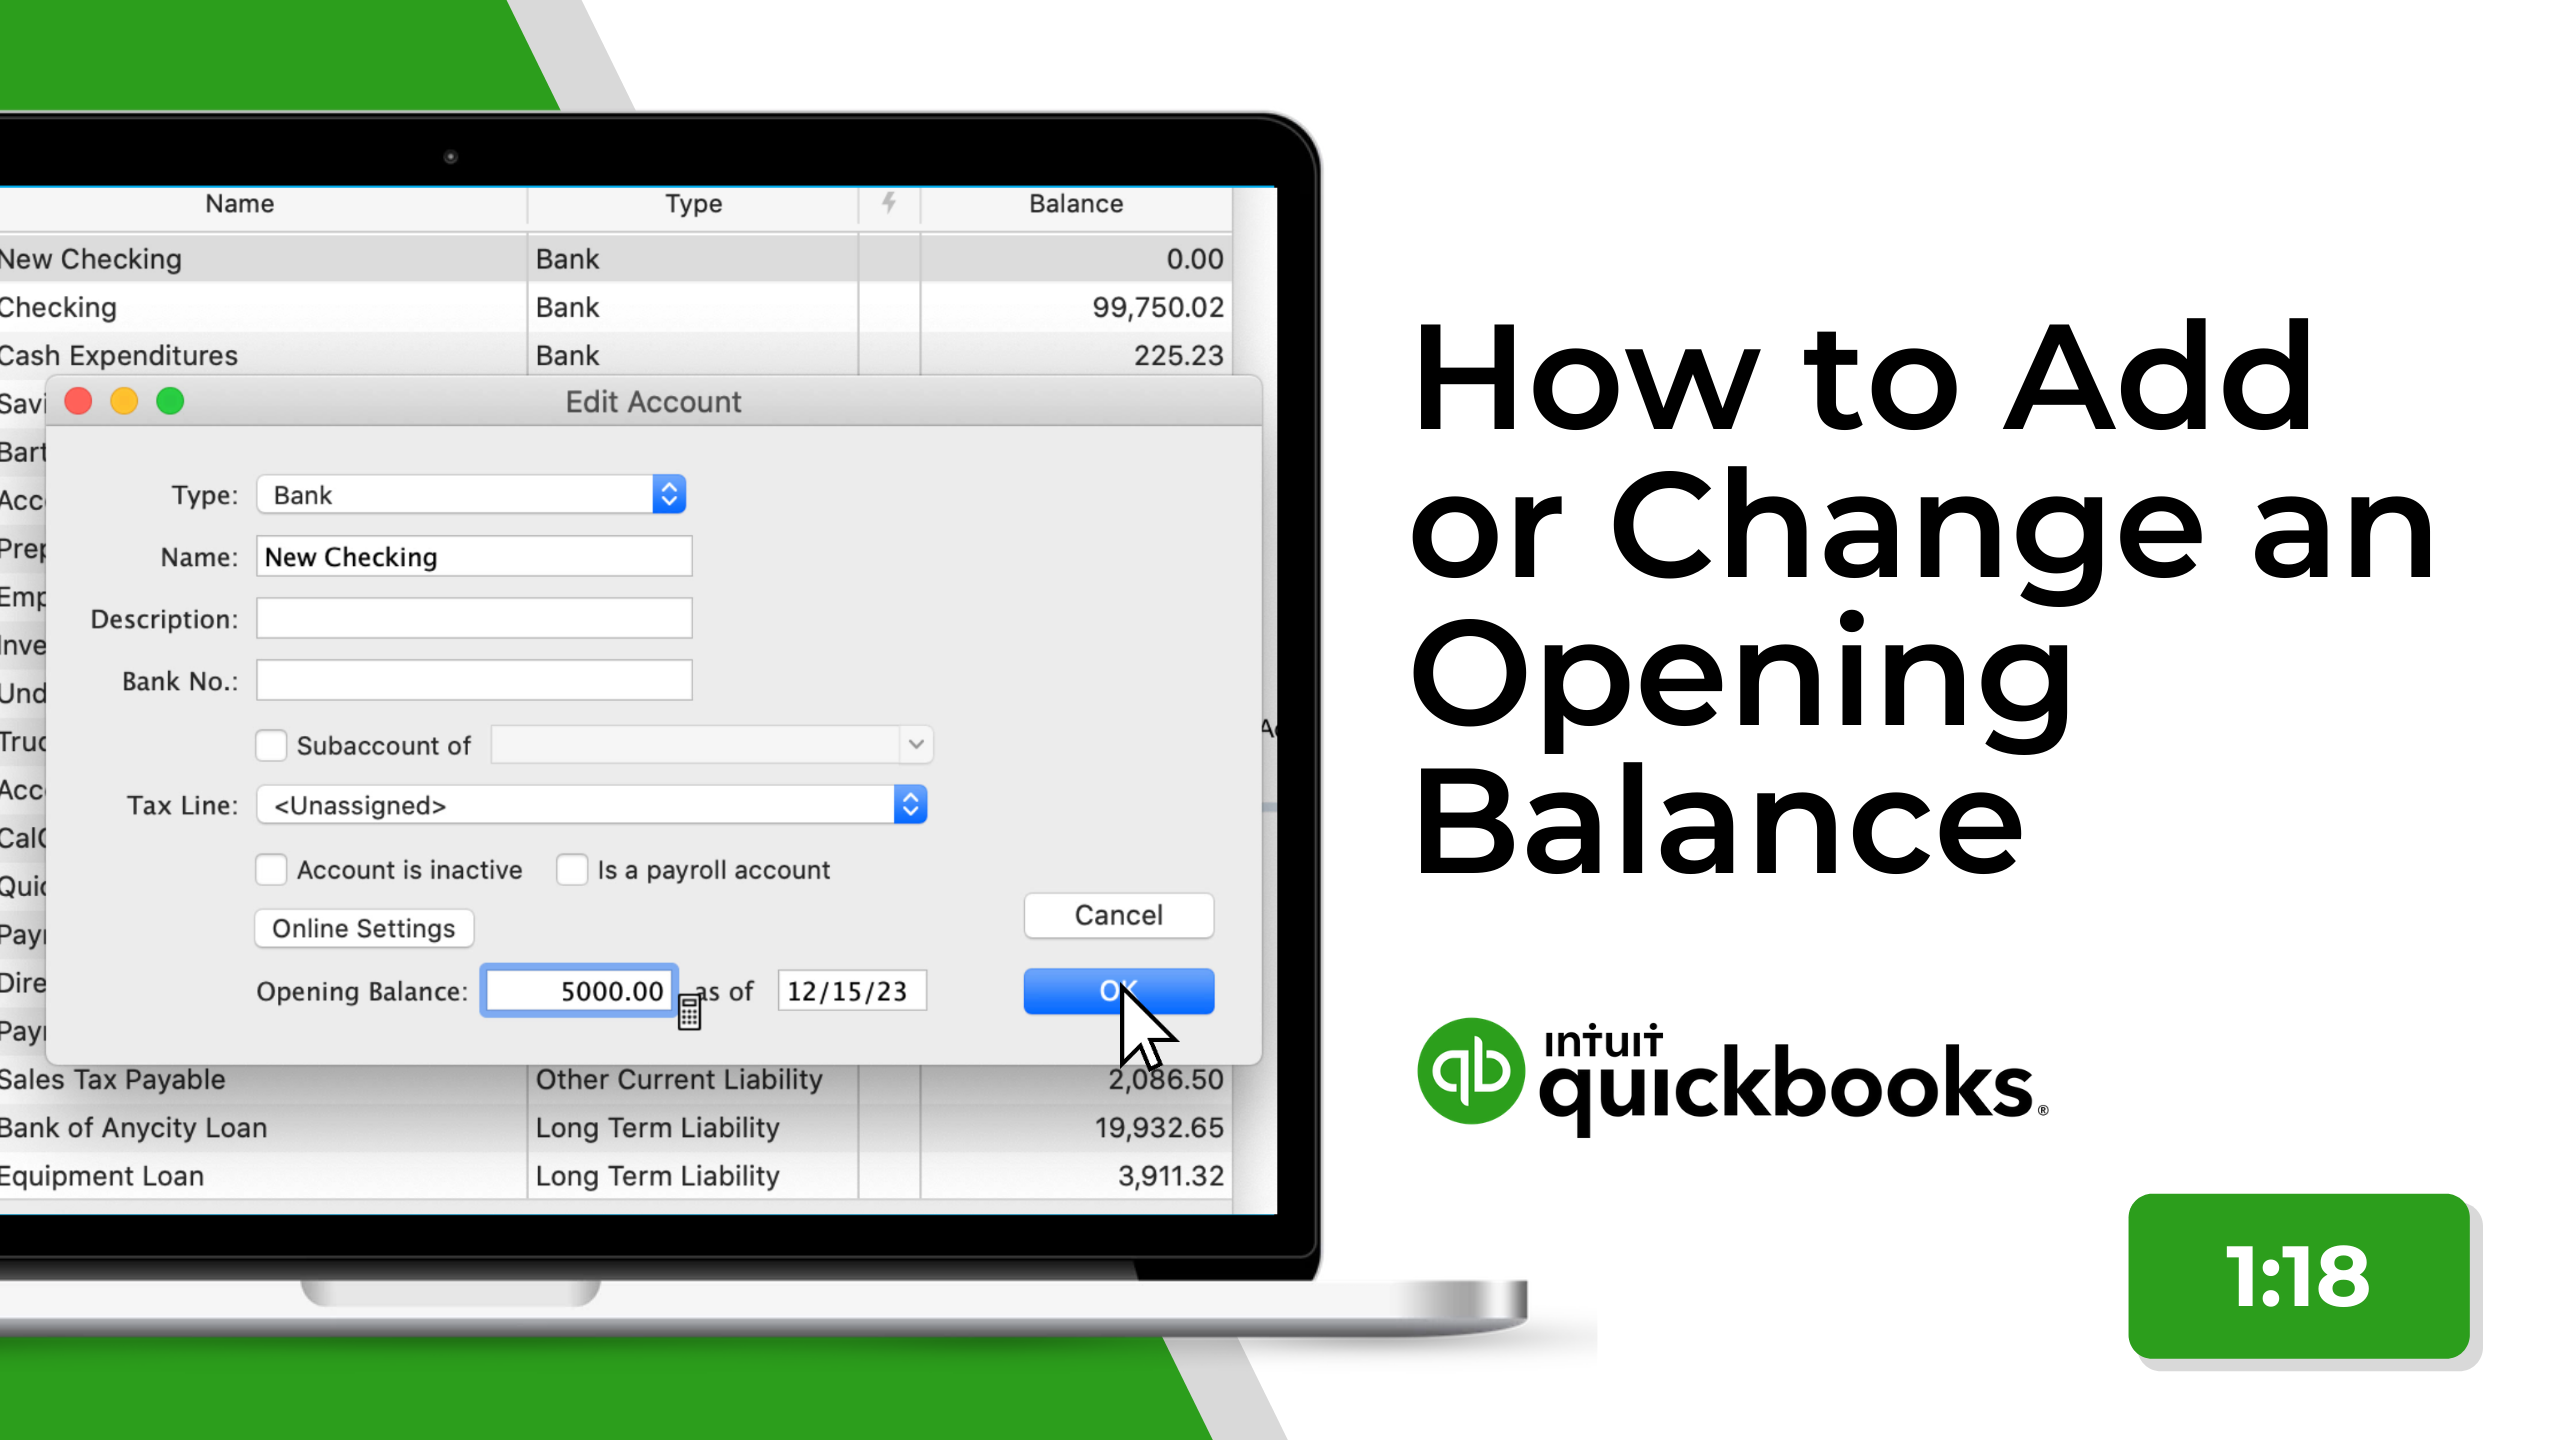 add a bank account to quickbooks for mac 2016